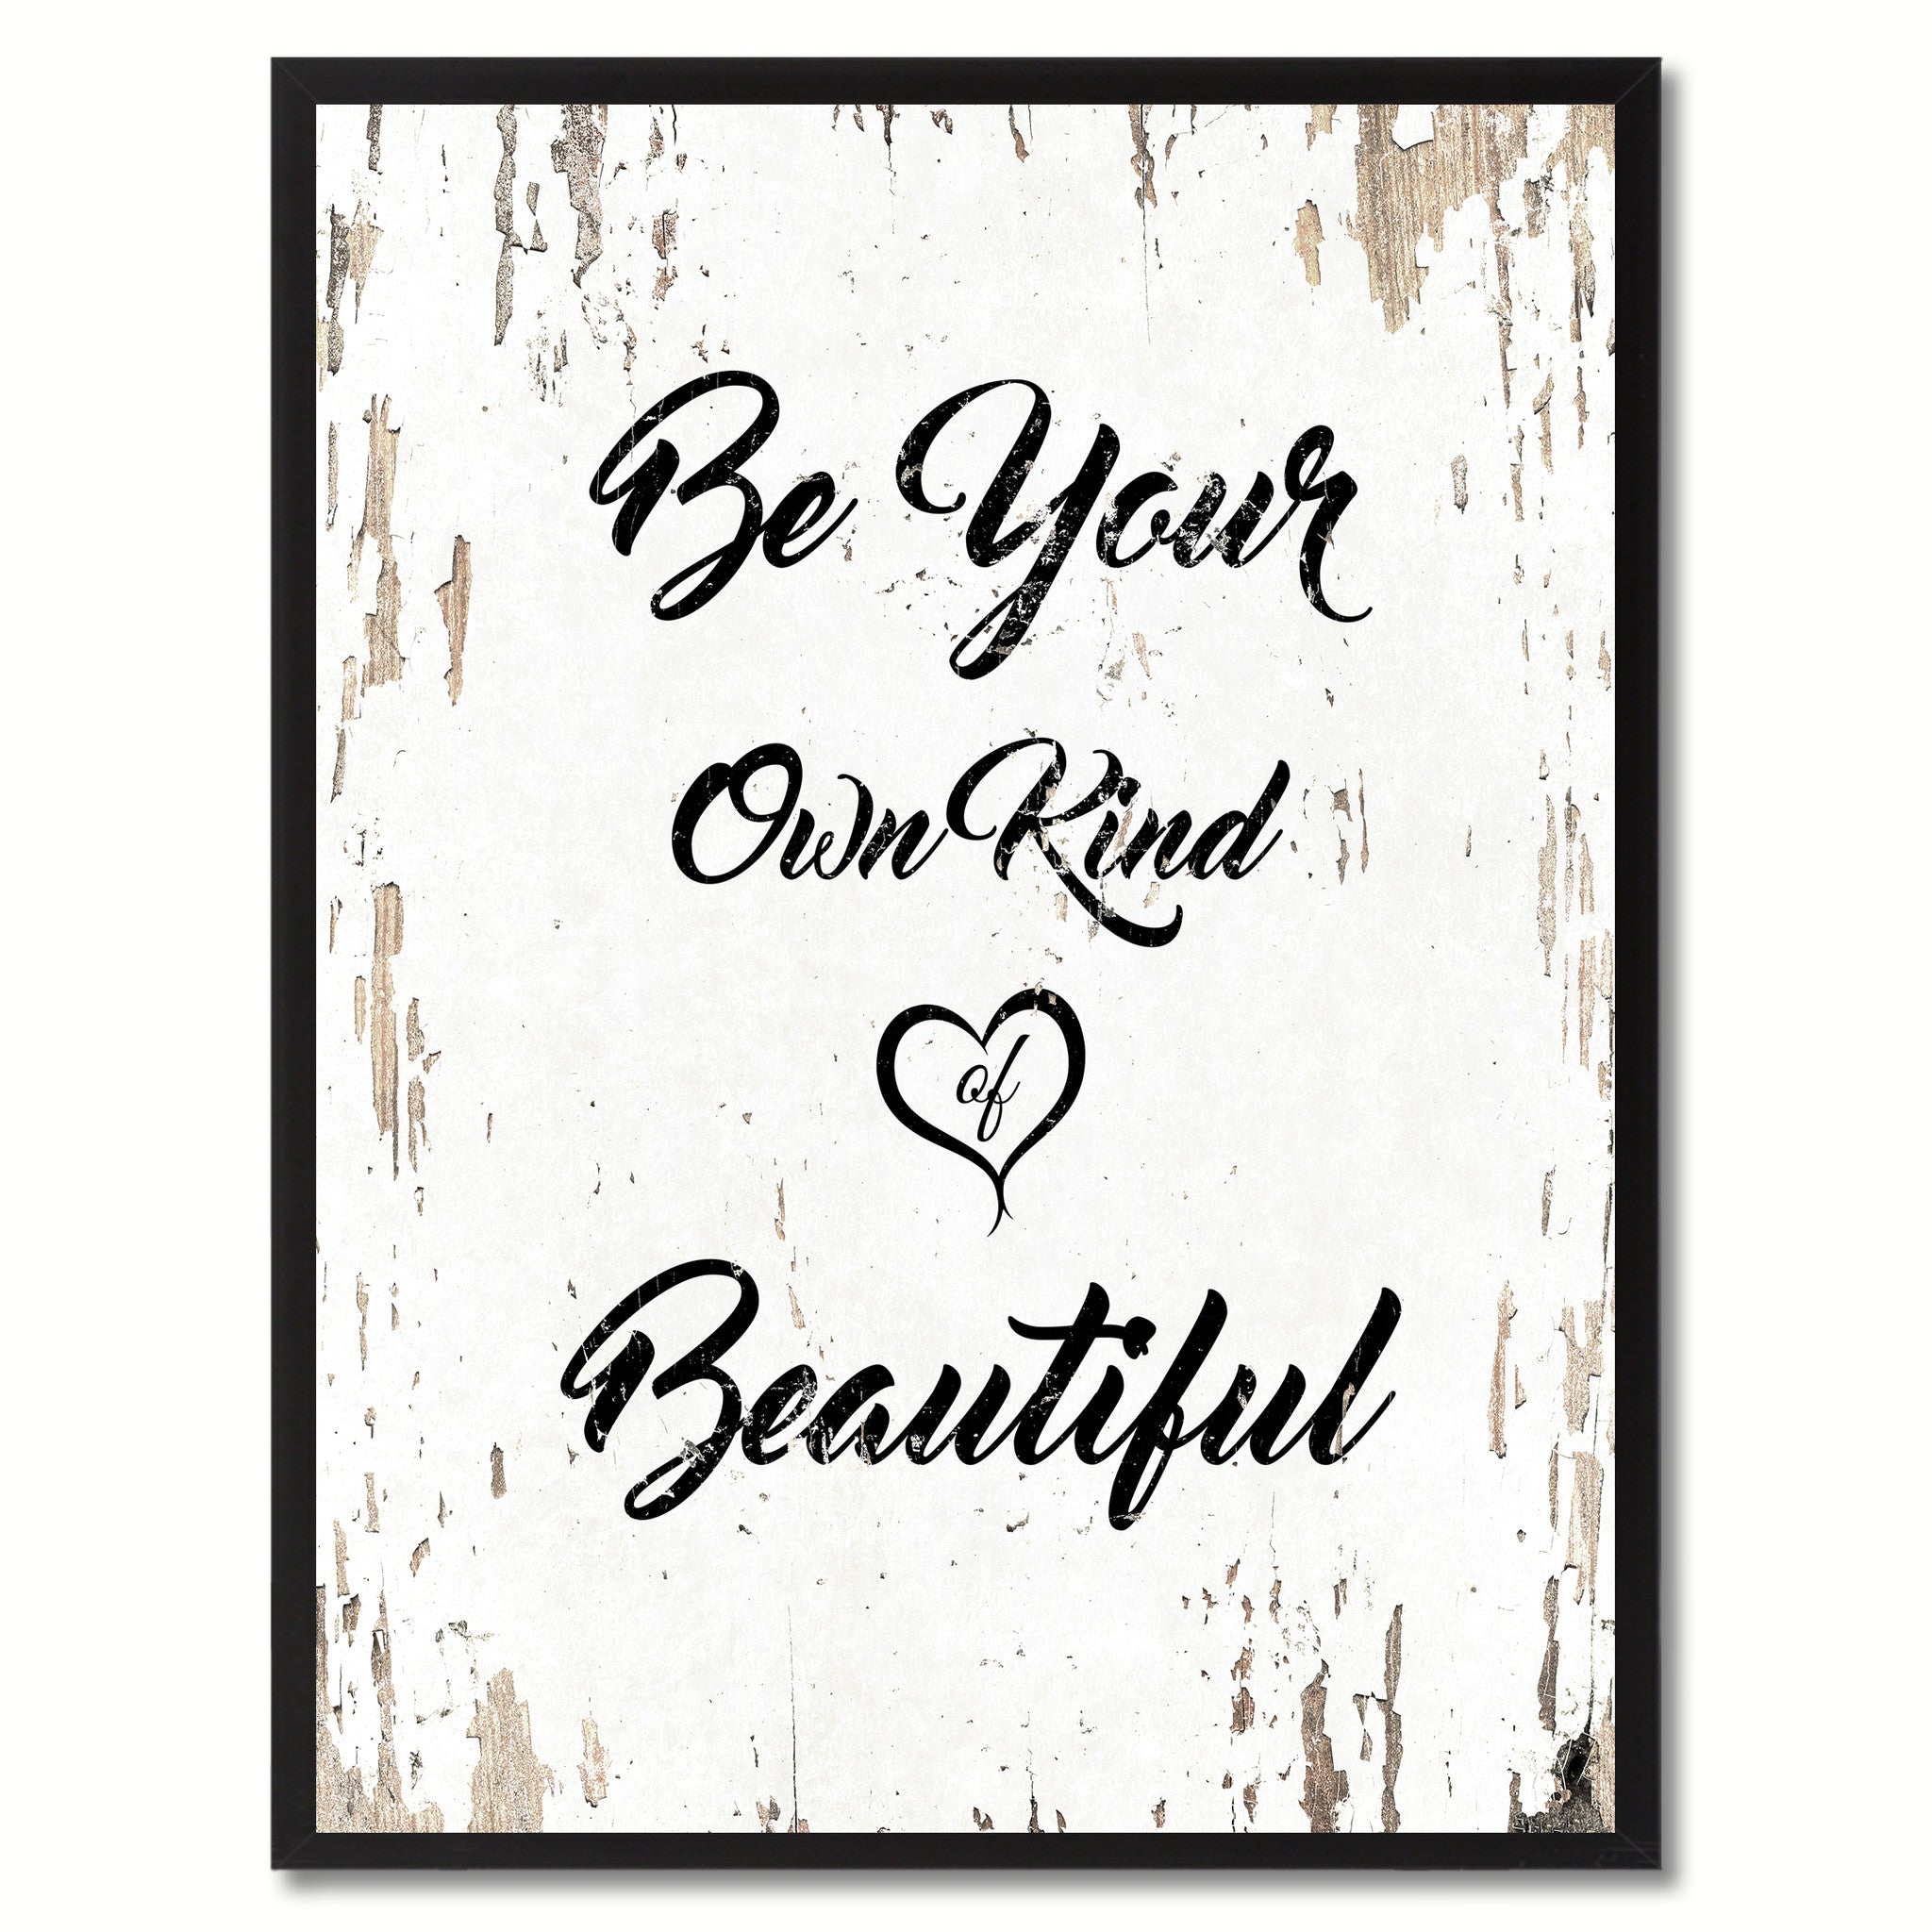 Be your own kind of beautiful Inspirational Quote Saying Gift Ideas Home Decor Wall Art